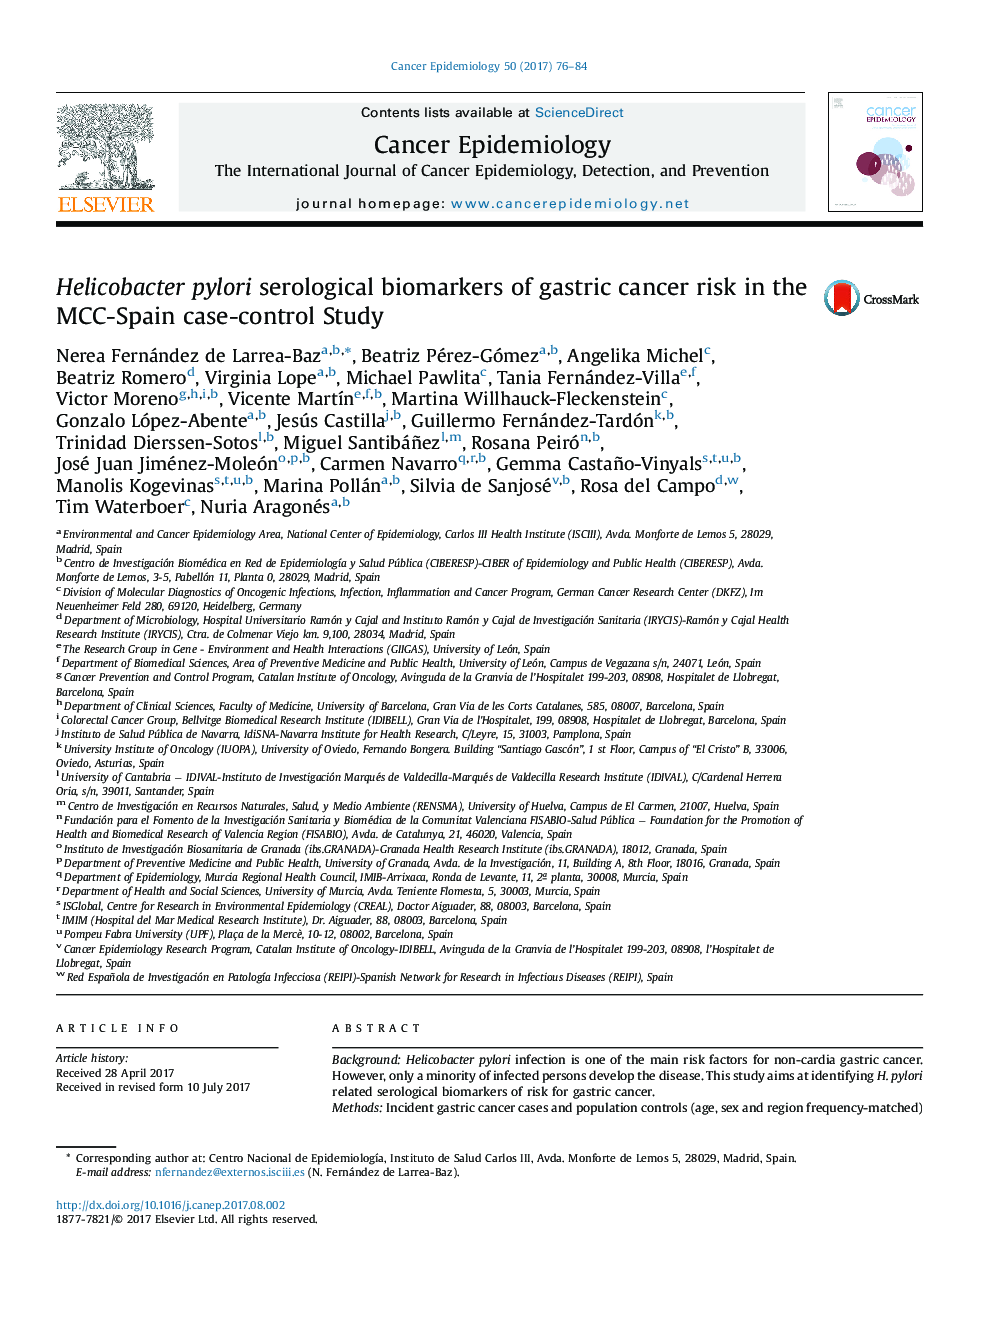 Helicobacter pylori serological biomarkers of gastric cancer risk in the MCC-Spain case-control Study